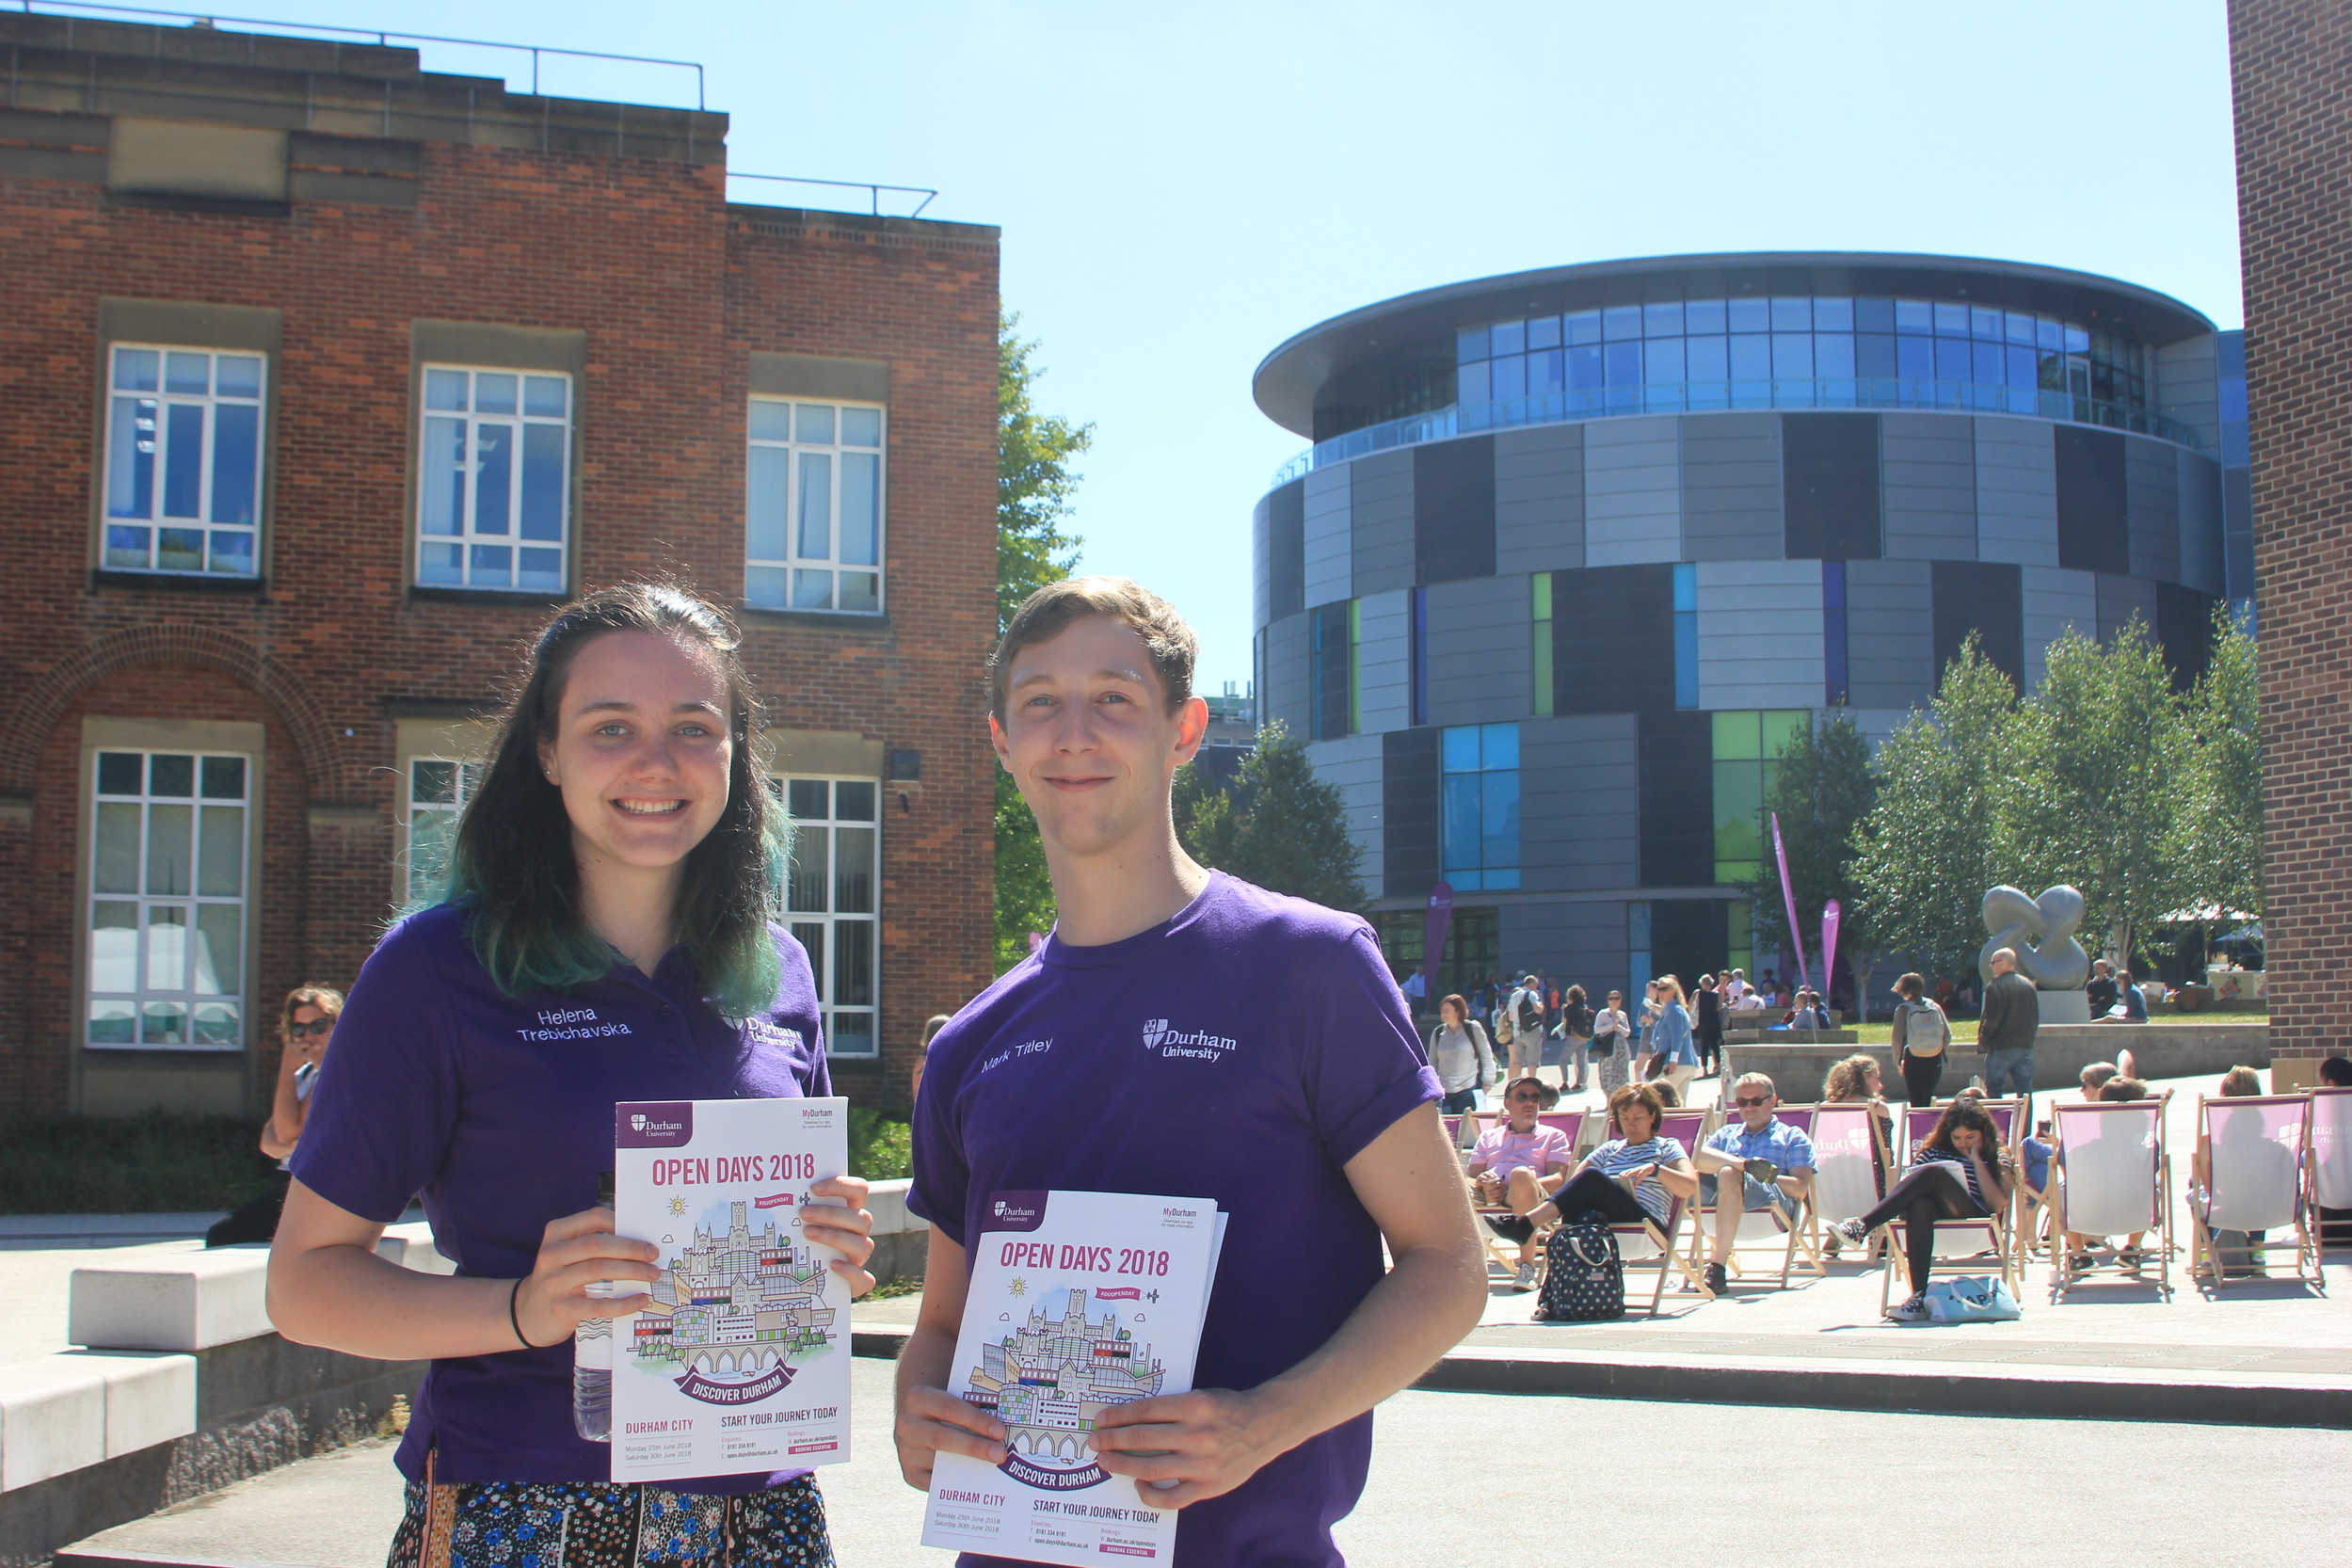 TTwo Durham students on campus with open day brochures